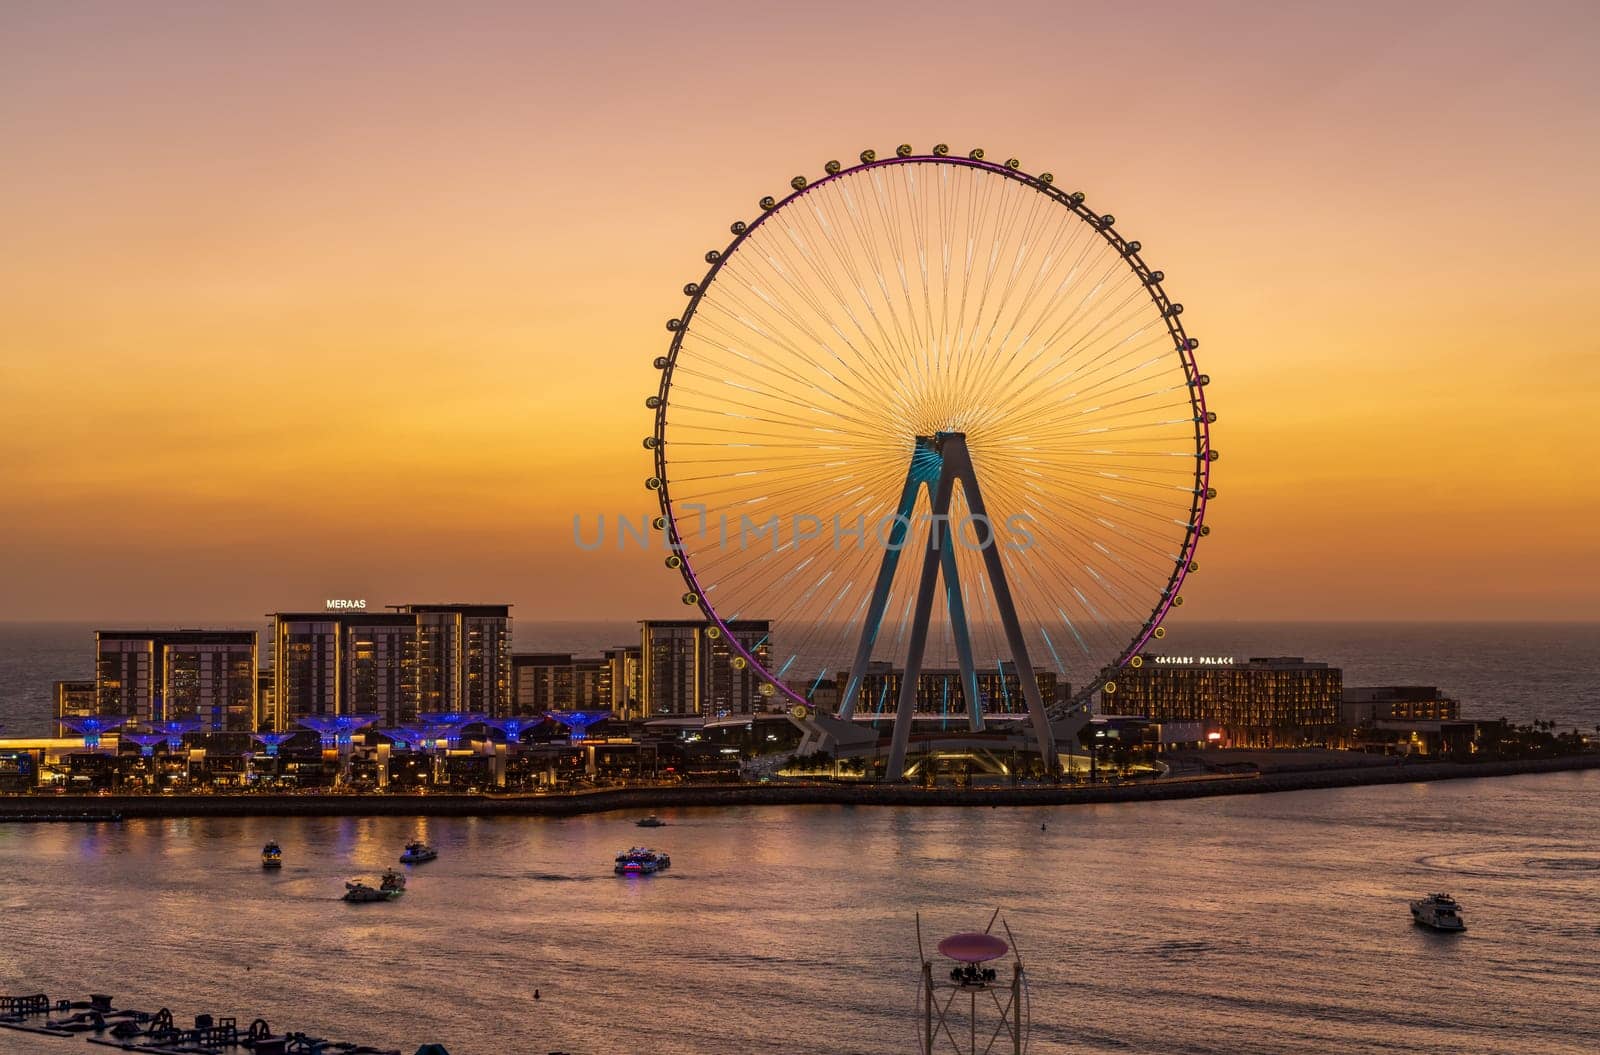 Light show on Ain Dubai observation wheel on Bluewaters Island by steheap